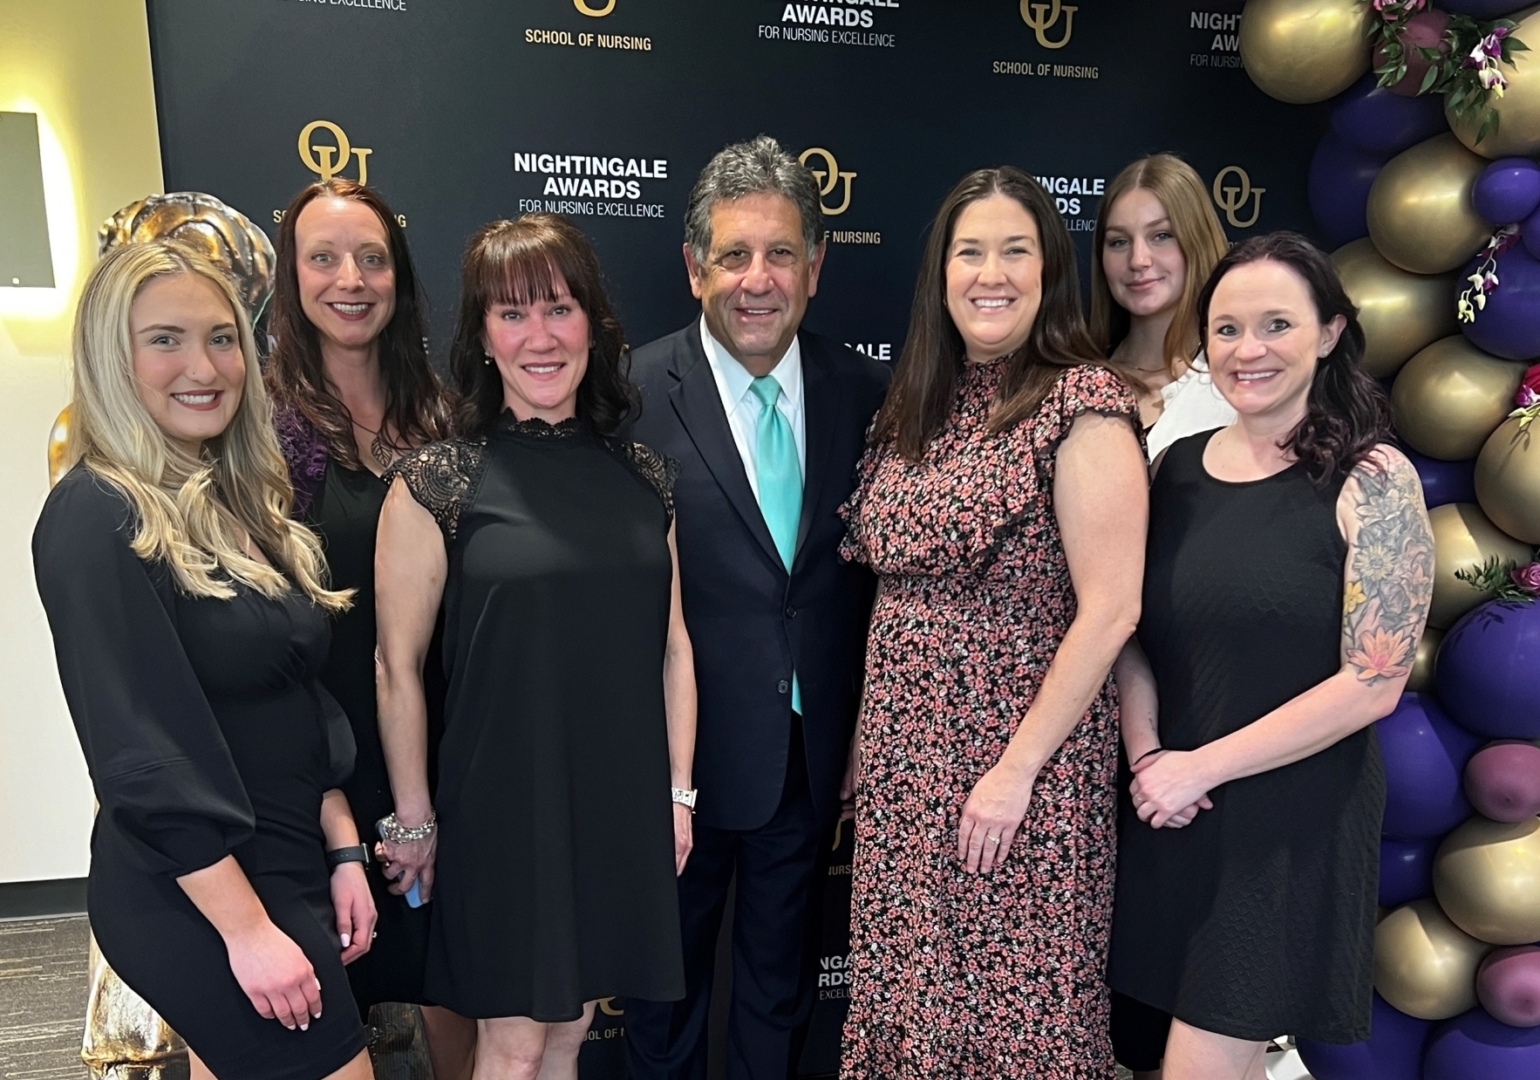 AmeriCare Medical, Inc. and their home care company, QCN Home Health Care, partnered with Oakland University School of Nursing to sponsor the 36th Nightingale Awards for Nursing Excellence.